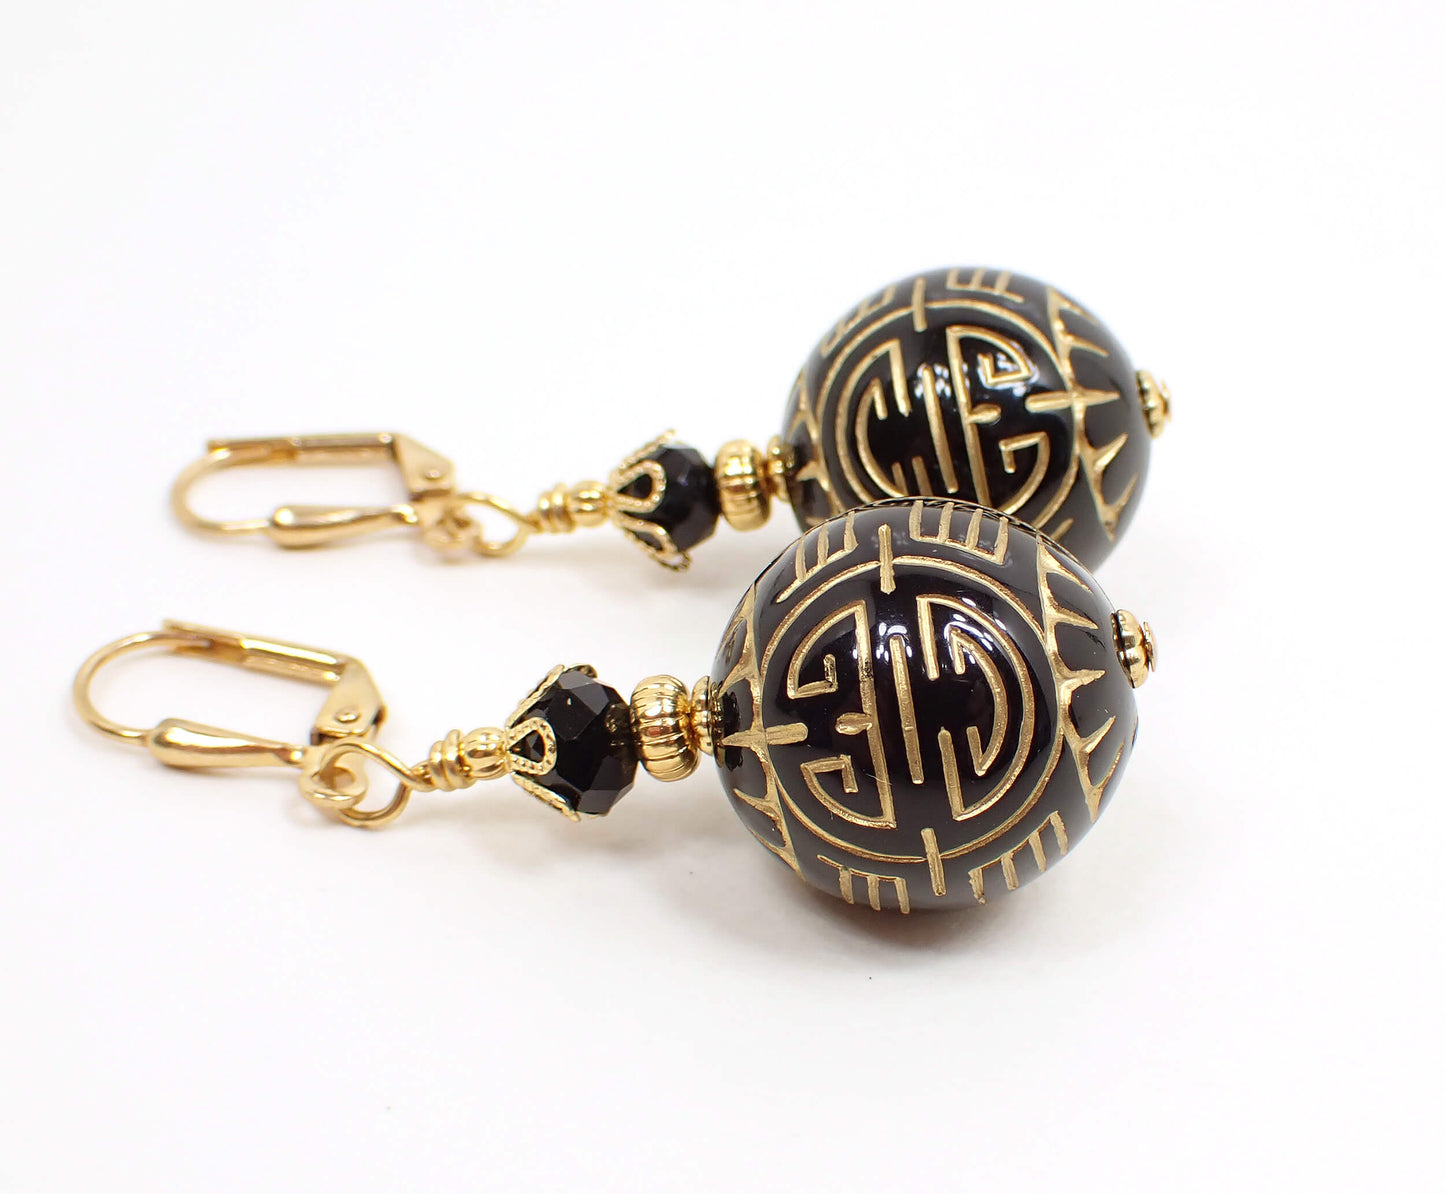 Black Acrylic Handmade Drop Earrings with Metallic Golden Design Gold Plated Hook Lever Back or Clip On